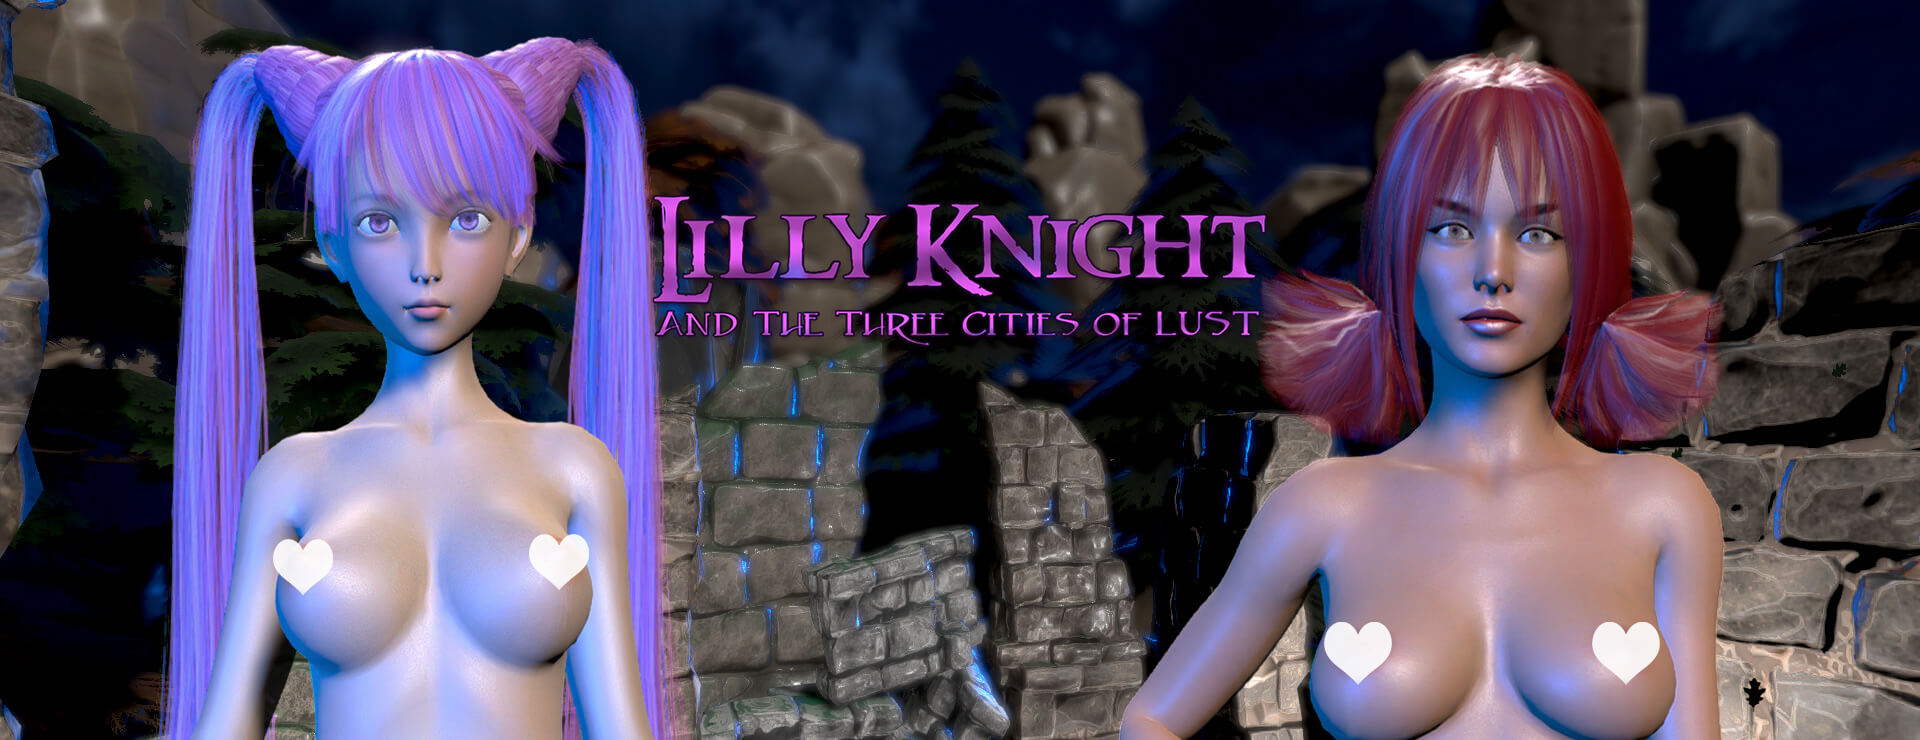 Lilly Knight and the Three Cities of Lust - Aventura Acción Juego